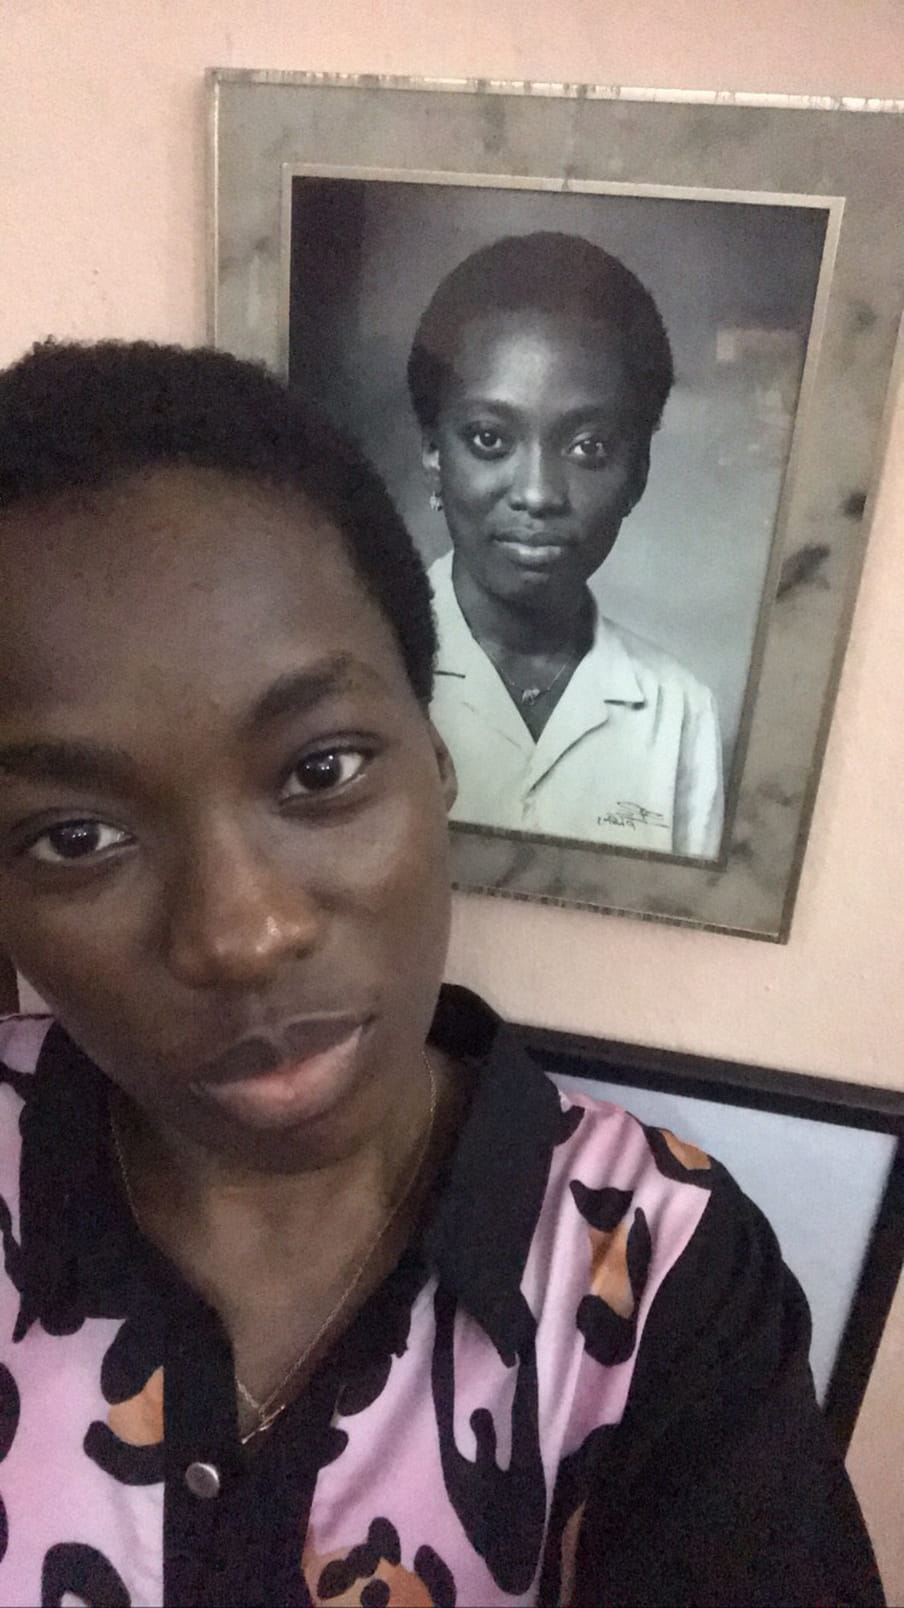 OluTimehin Adegbeye stands next to a framed photo of her mother, Olusegun Adegbeye. Pictures, a woman in a black and pink top smiles at camera; behind her a black and white framed photo hangs on a wall of another woman, smiling, wearing a white shirt